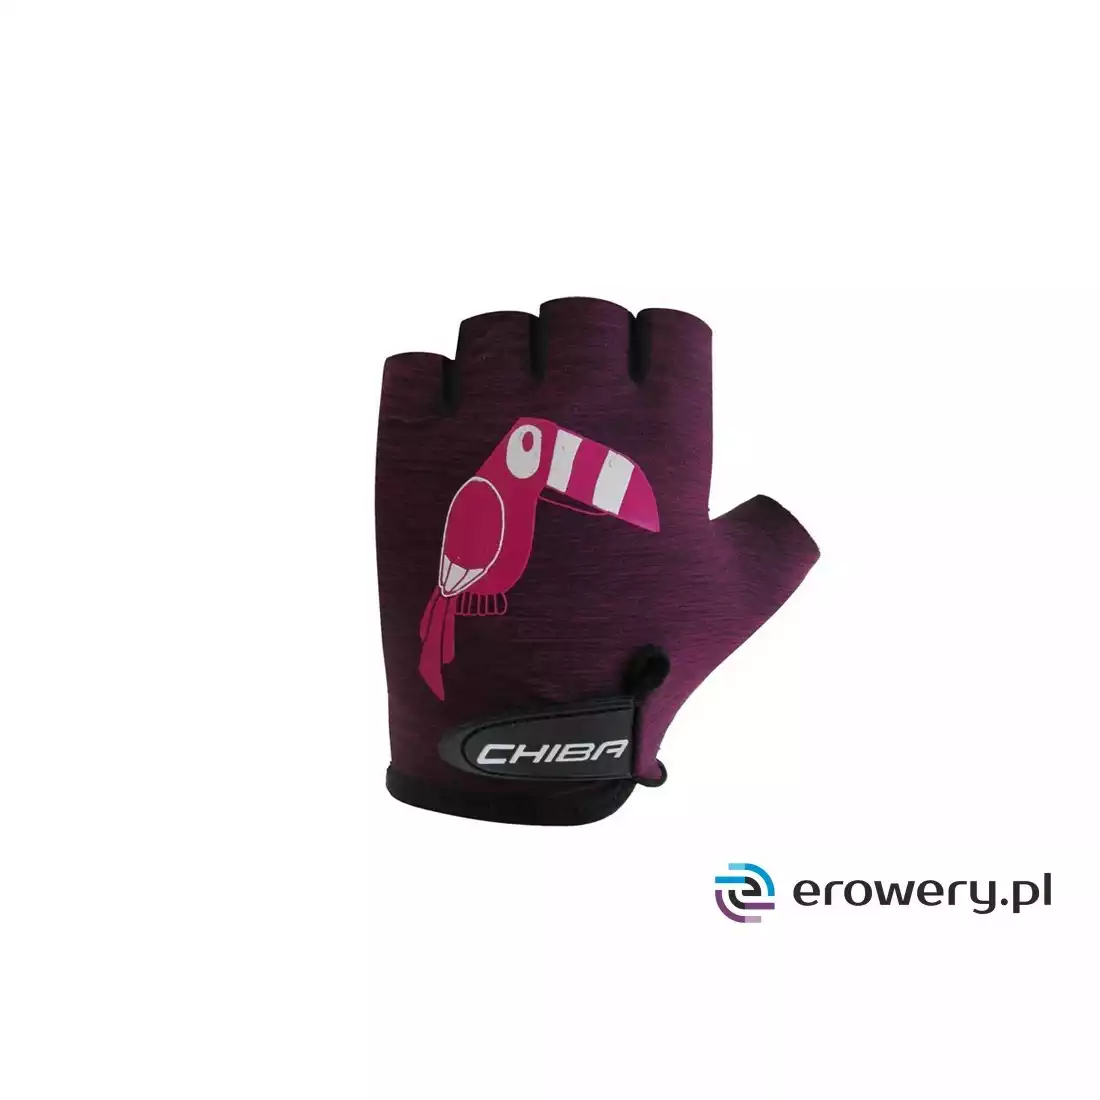 CHIBA COOL KIDS children's cycling gloves violet / parrot 